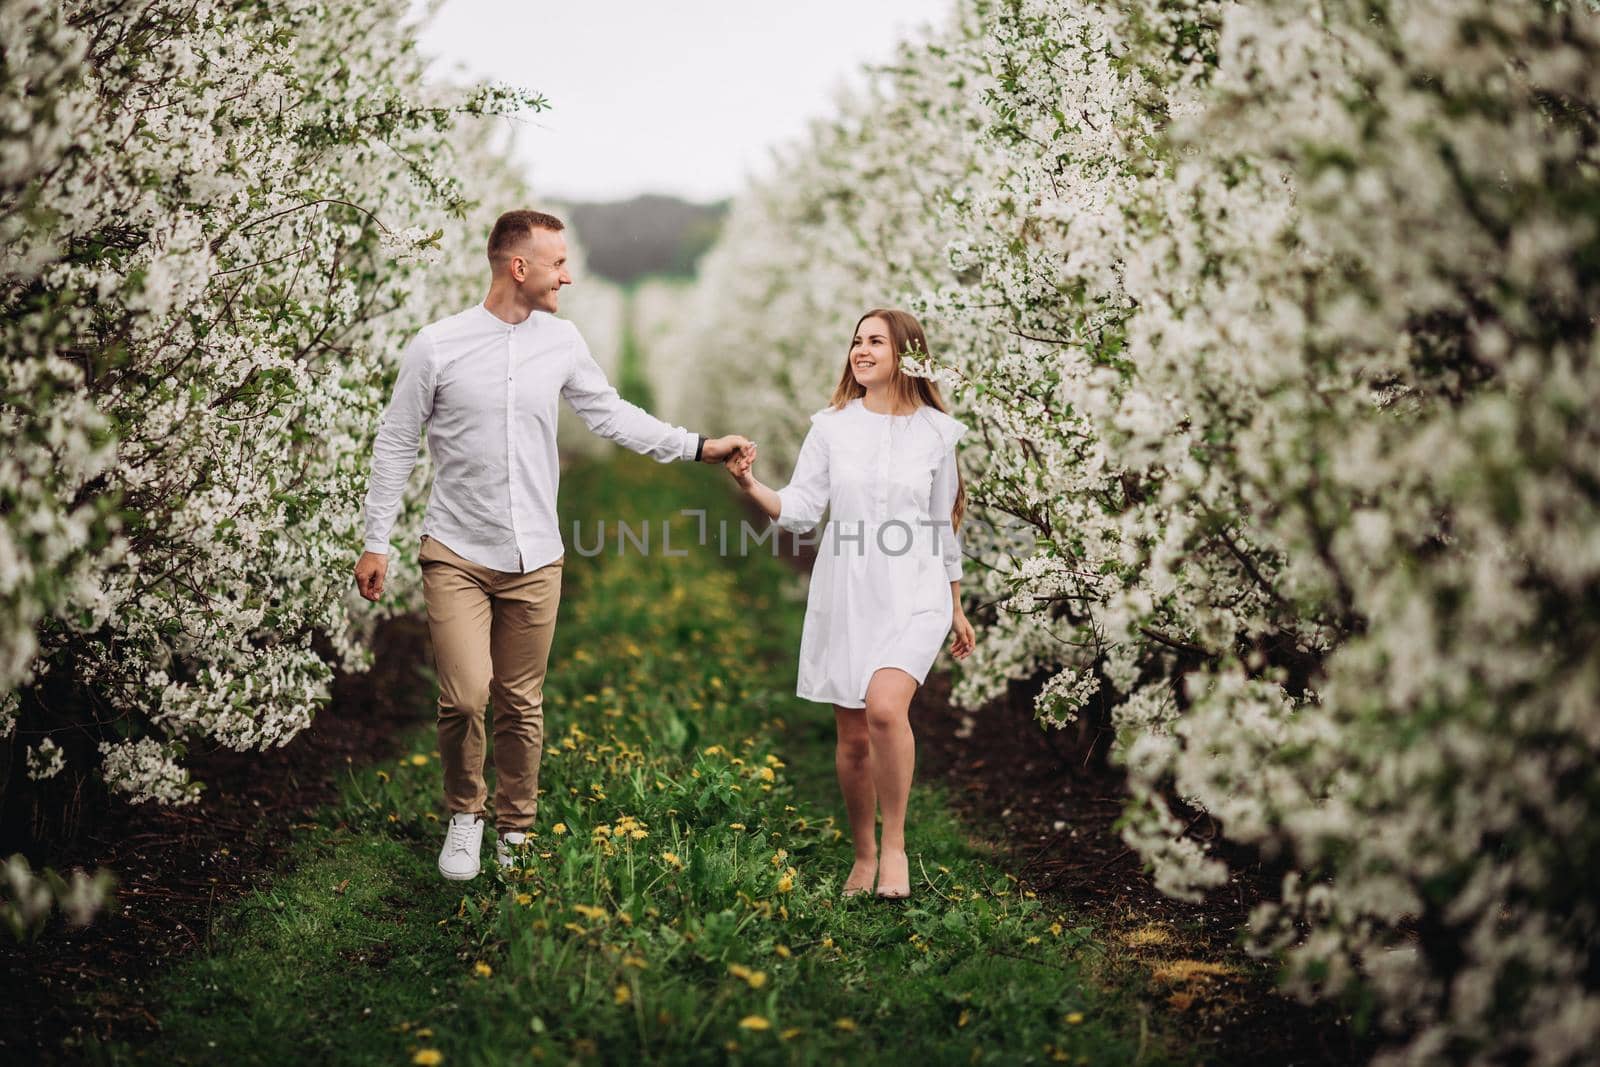 Happy family couple in spring blooming apple orchard. Young couple in love enjoy each other while walking in the garden. The man holds the woman's hand. Family relationships by Dmitrytph